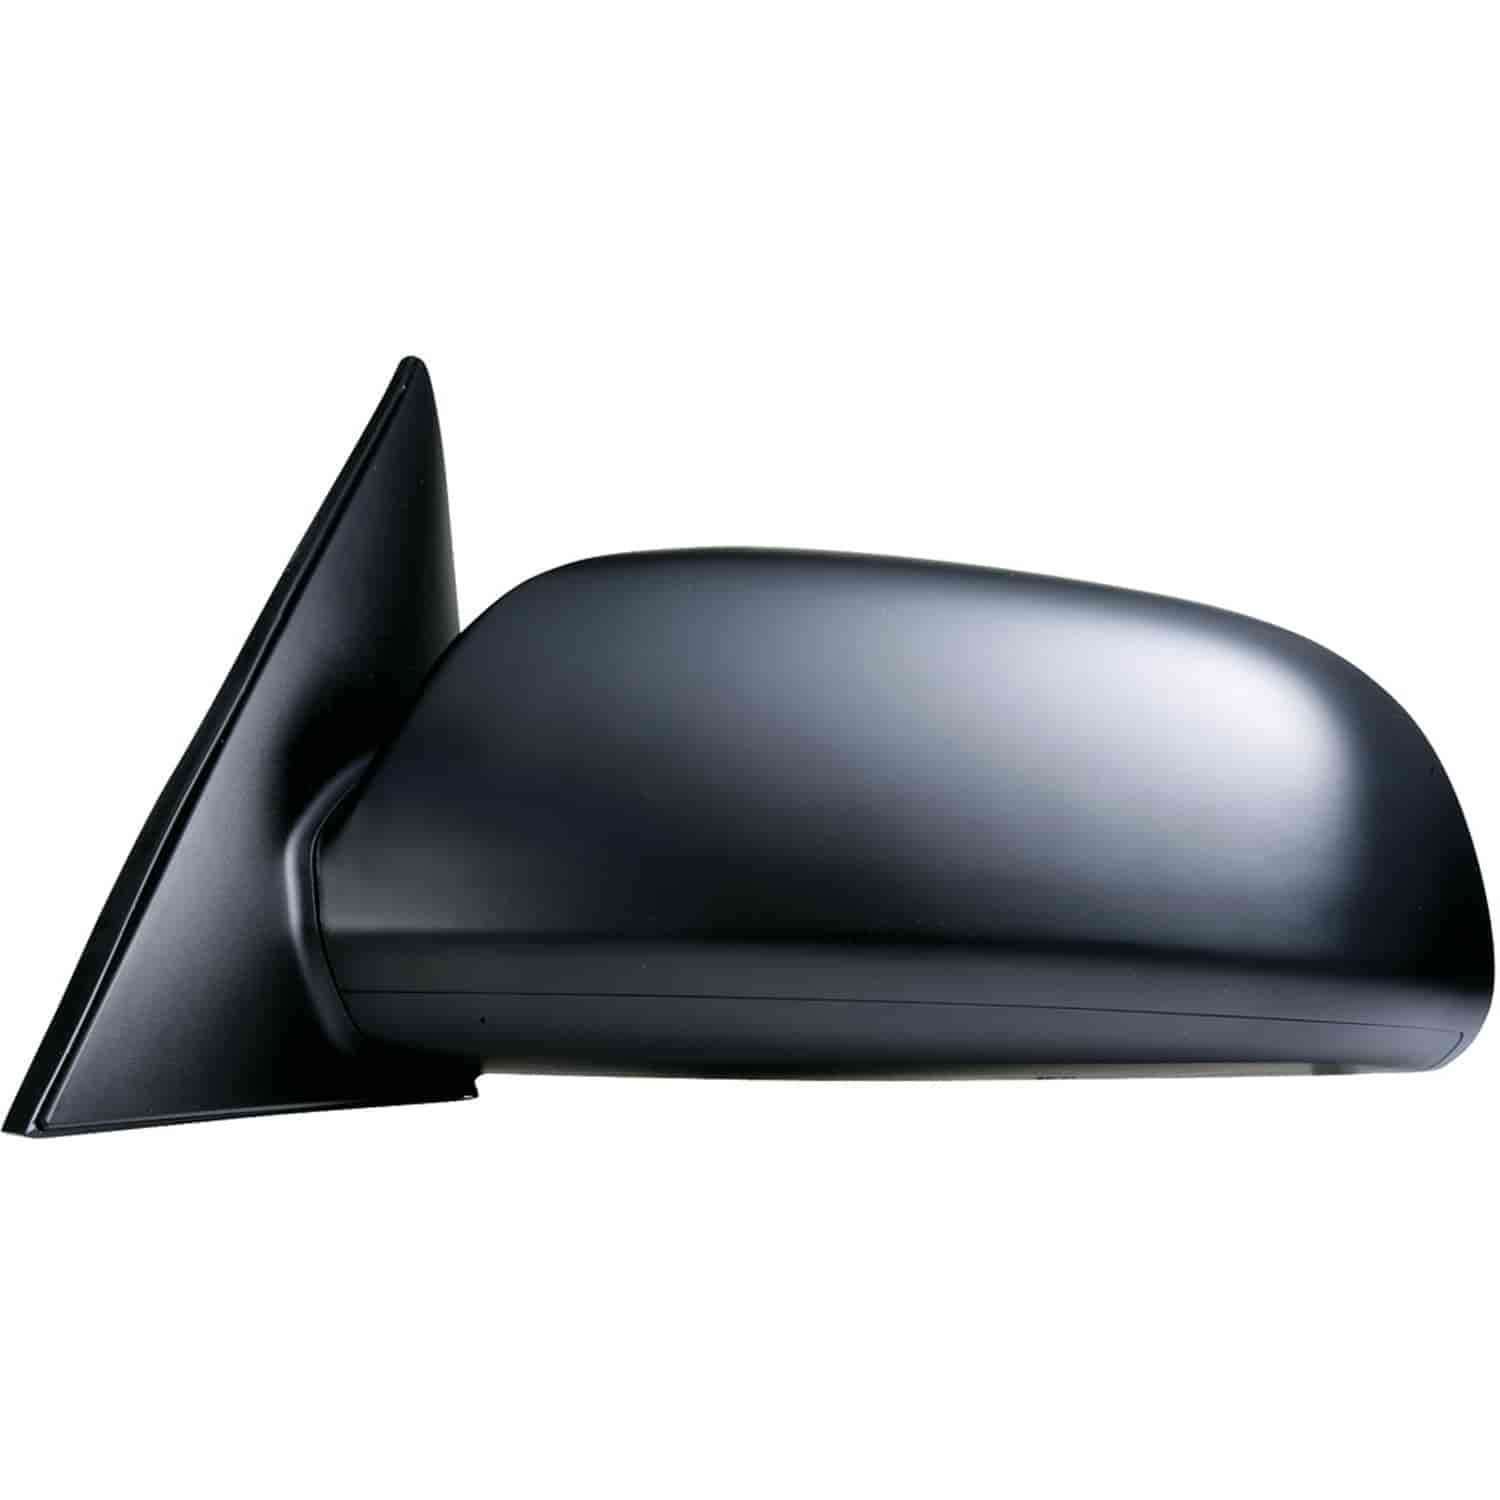 OEM Style Replacement mirror for 06; 07-10 Hyundai Sonata driver side mirror tested to fit and funct